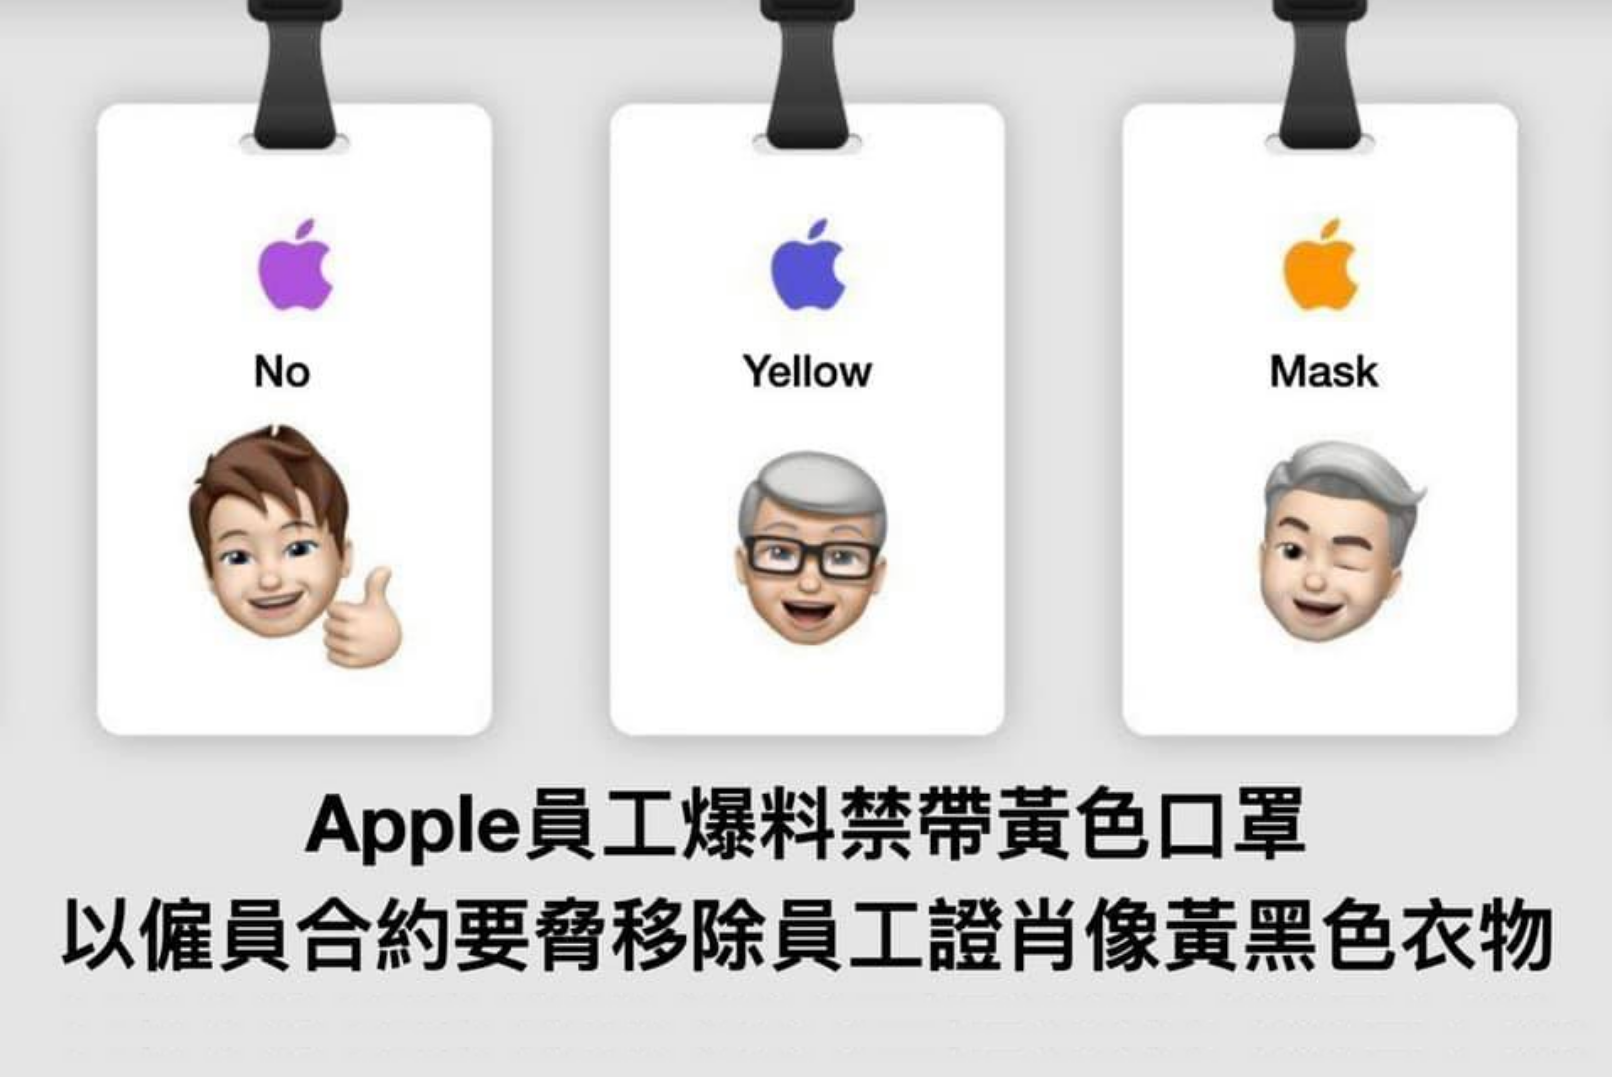 According to the Chinese text, an Apple employee says the company has banned employees from wearing yellow face masks, and threatened not to renew their contracts if they do not remove yellow and black accessories from their Memojis. Photo via Facebook/Joshua Wong